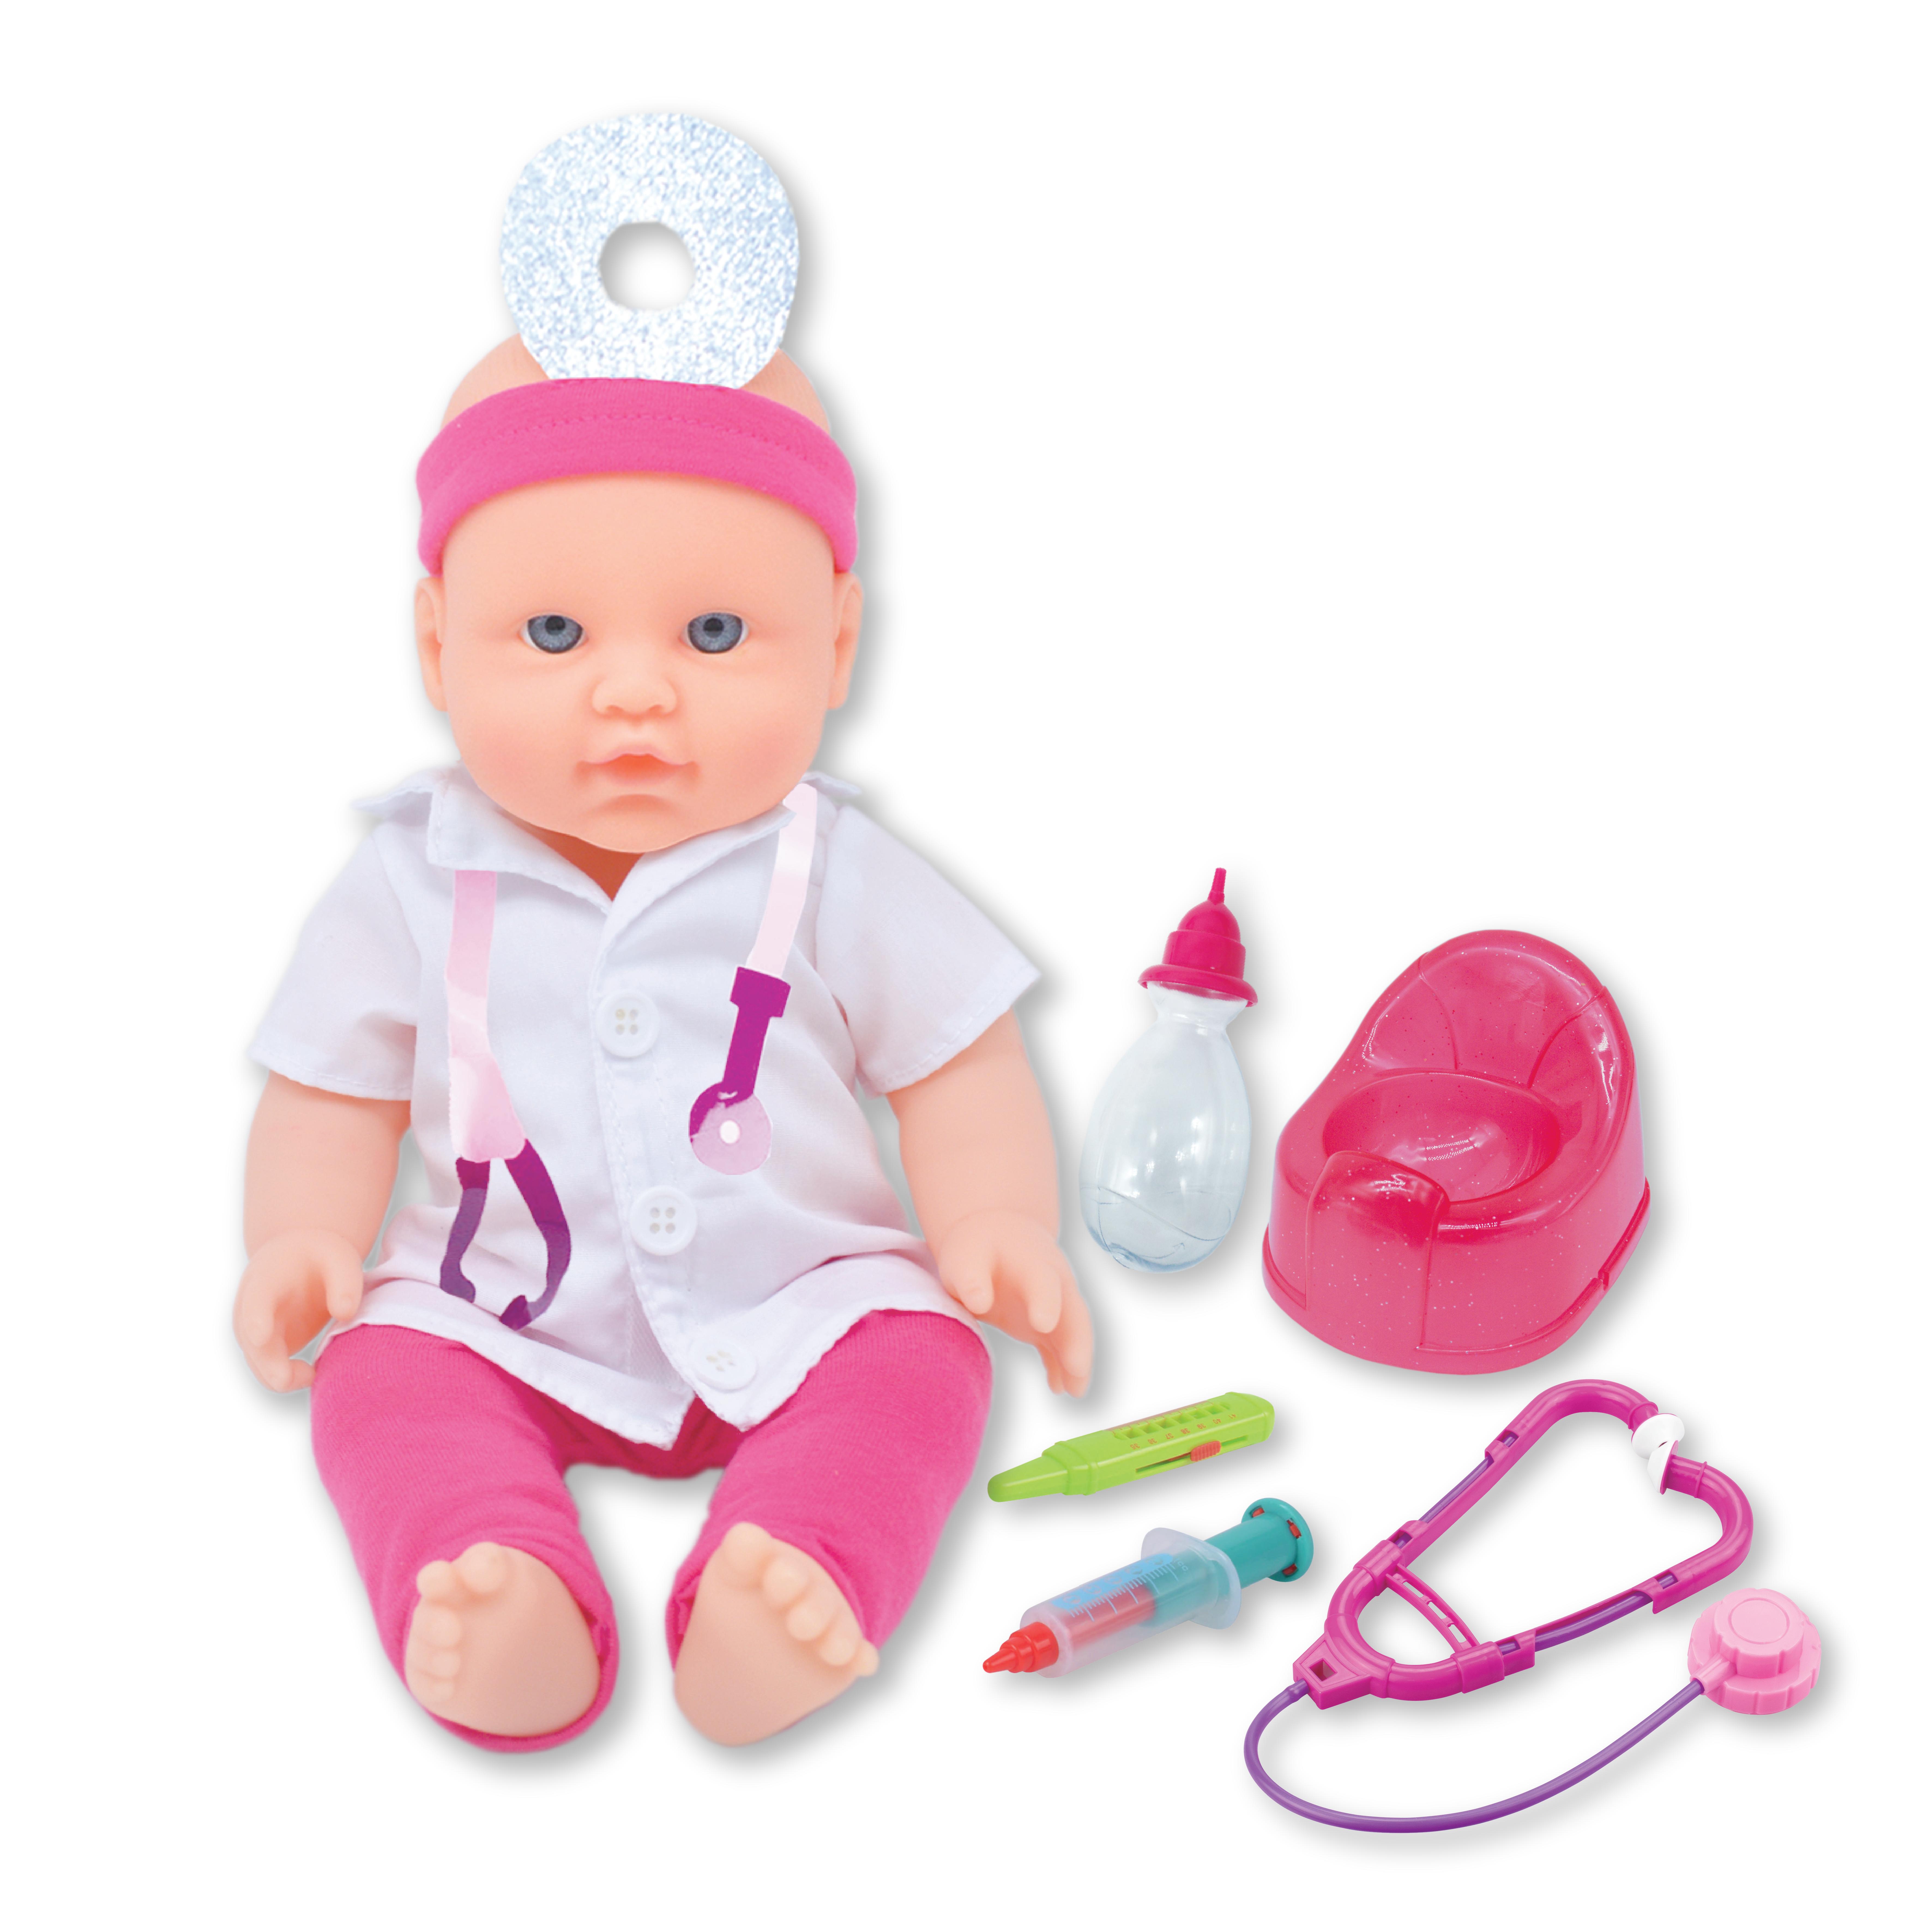 12 Inch Doll, Doctor Set